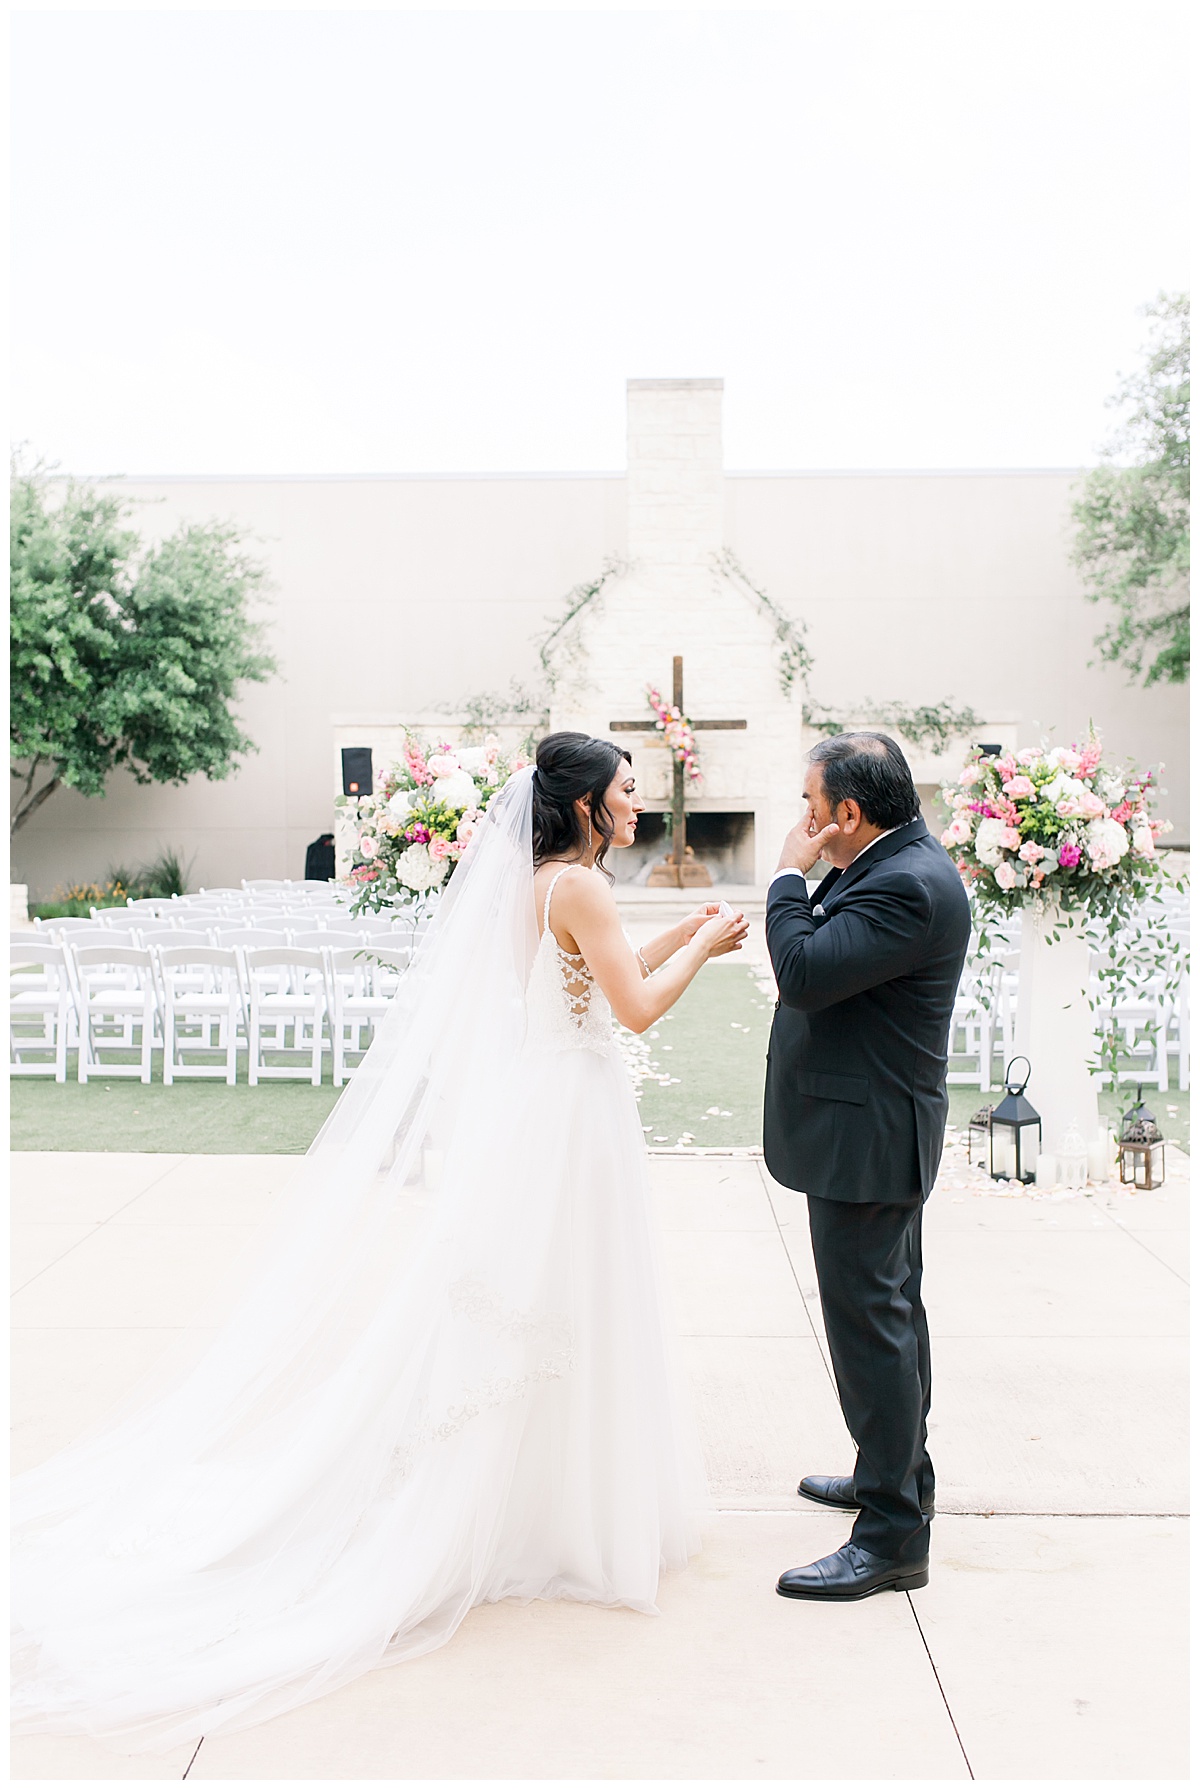 Bride wiping away her father's tears after he sees her for the first time at Hyatt Regency Hill Country Resort Wedding in San Antonio, TX | San Antonio Wedding photographer| Destination Wedding Photographer| Monica Roberts Photography | monicaroberts.com